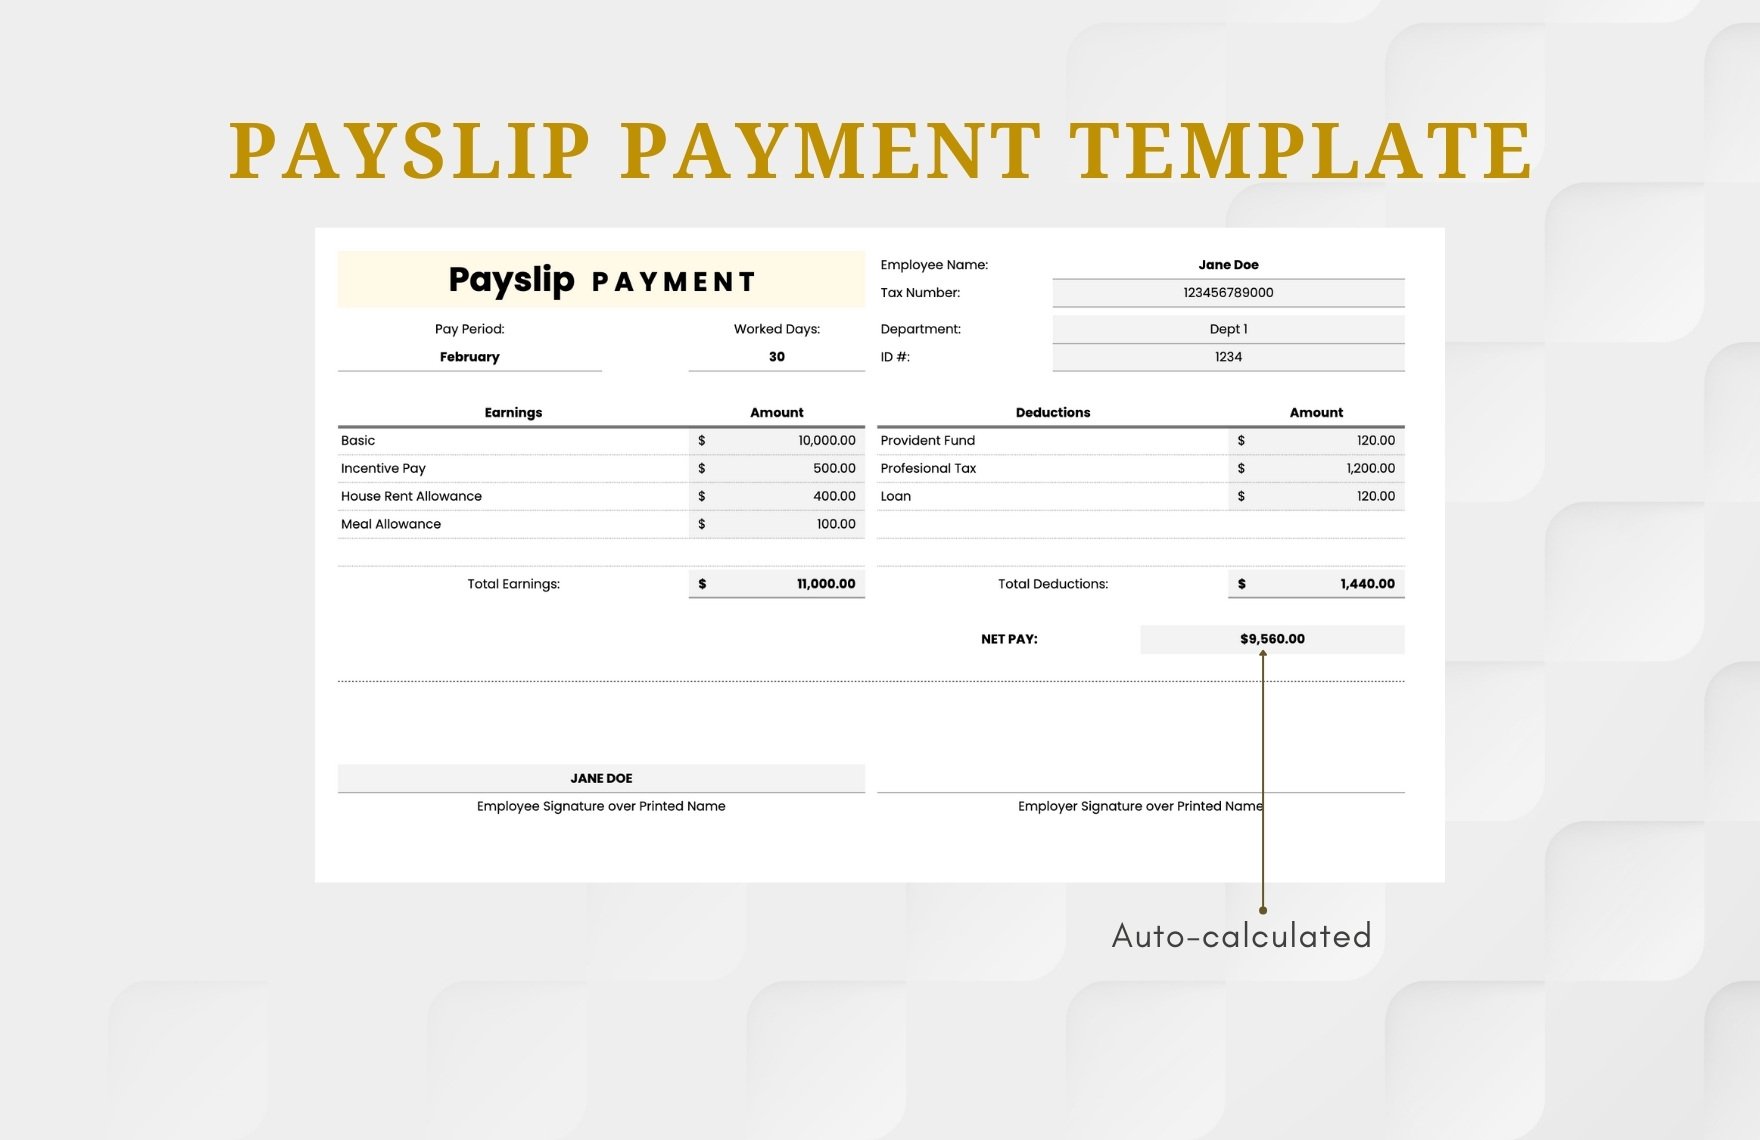 Payslip Payment Template